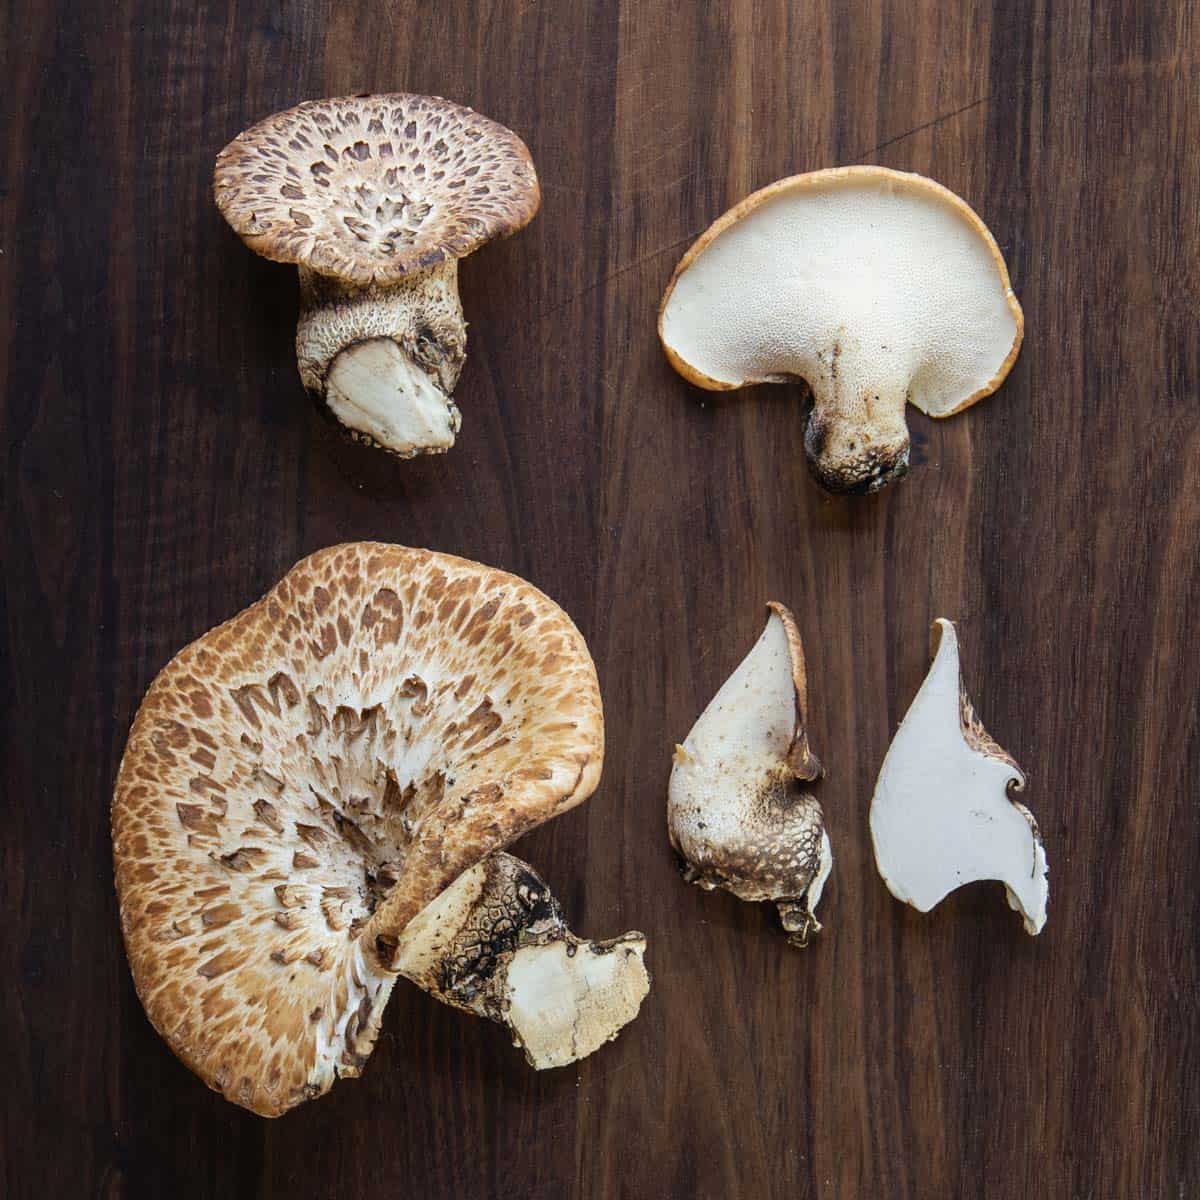 Old and young mushrooms on a cutting board.